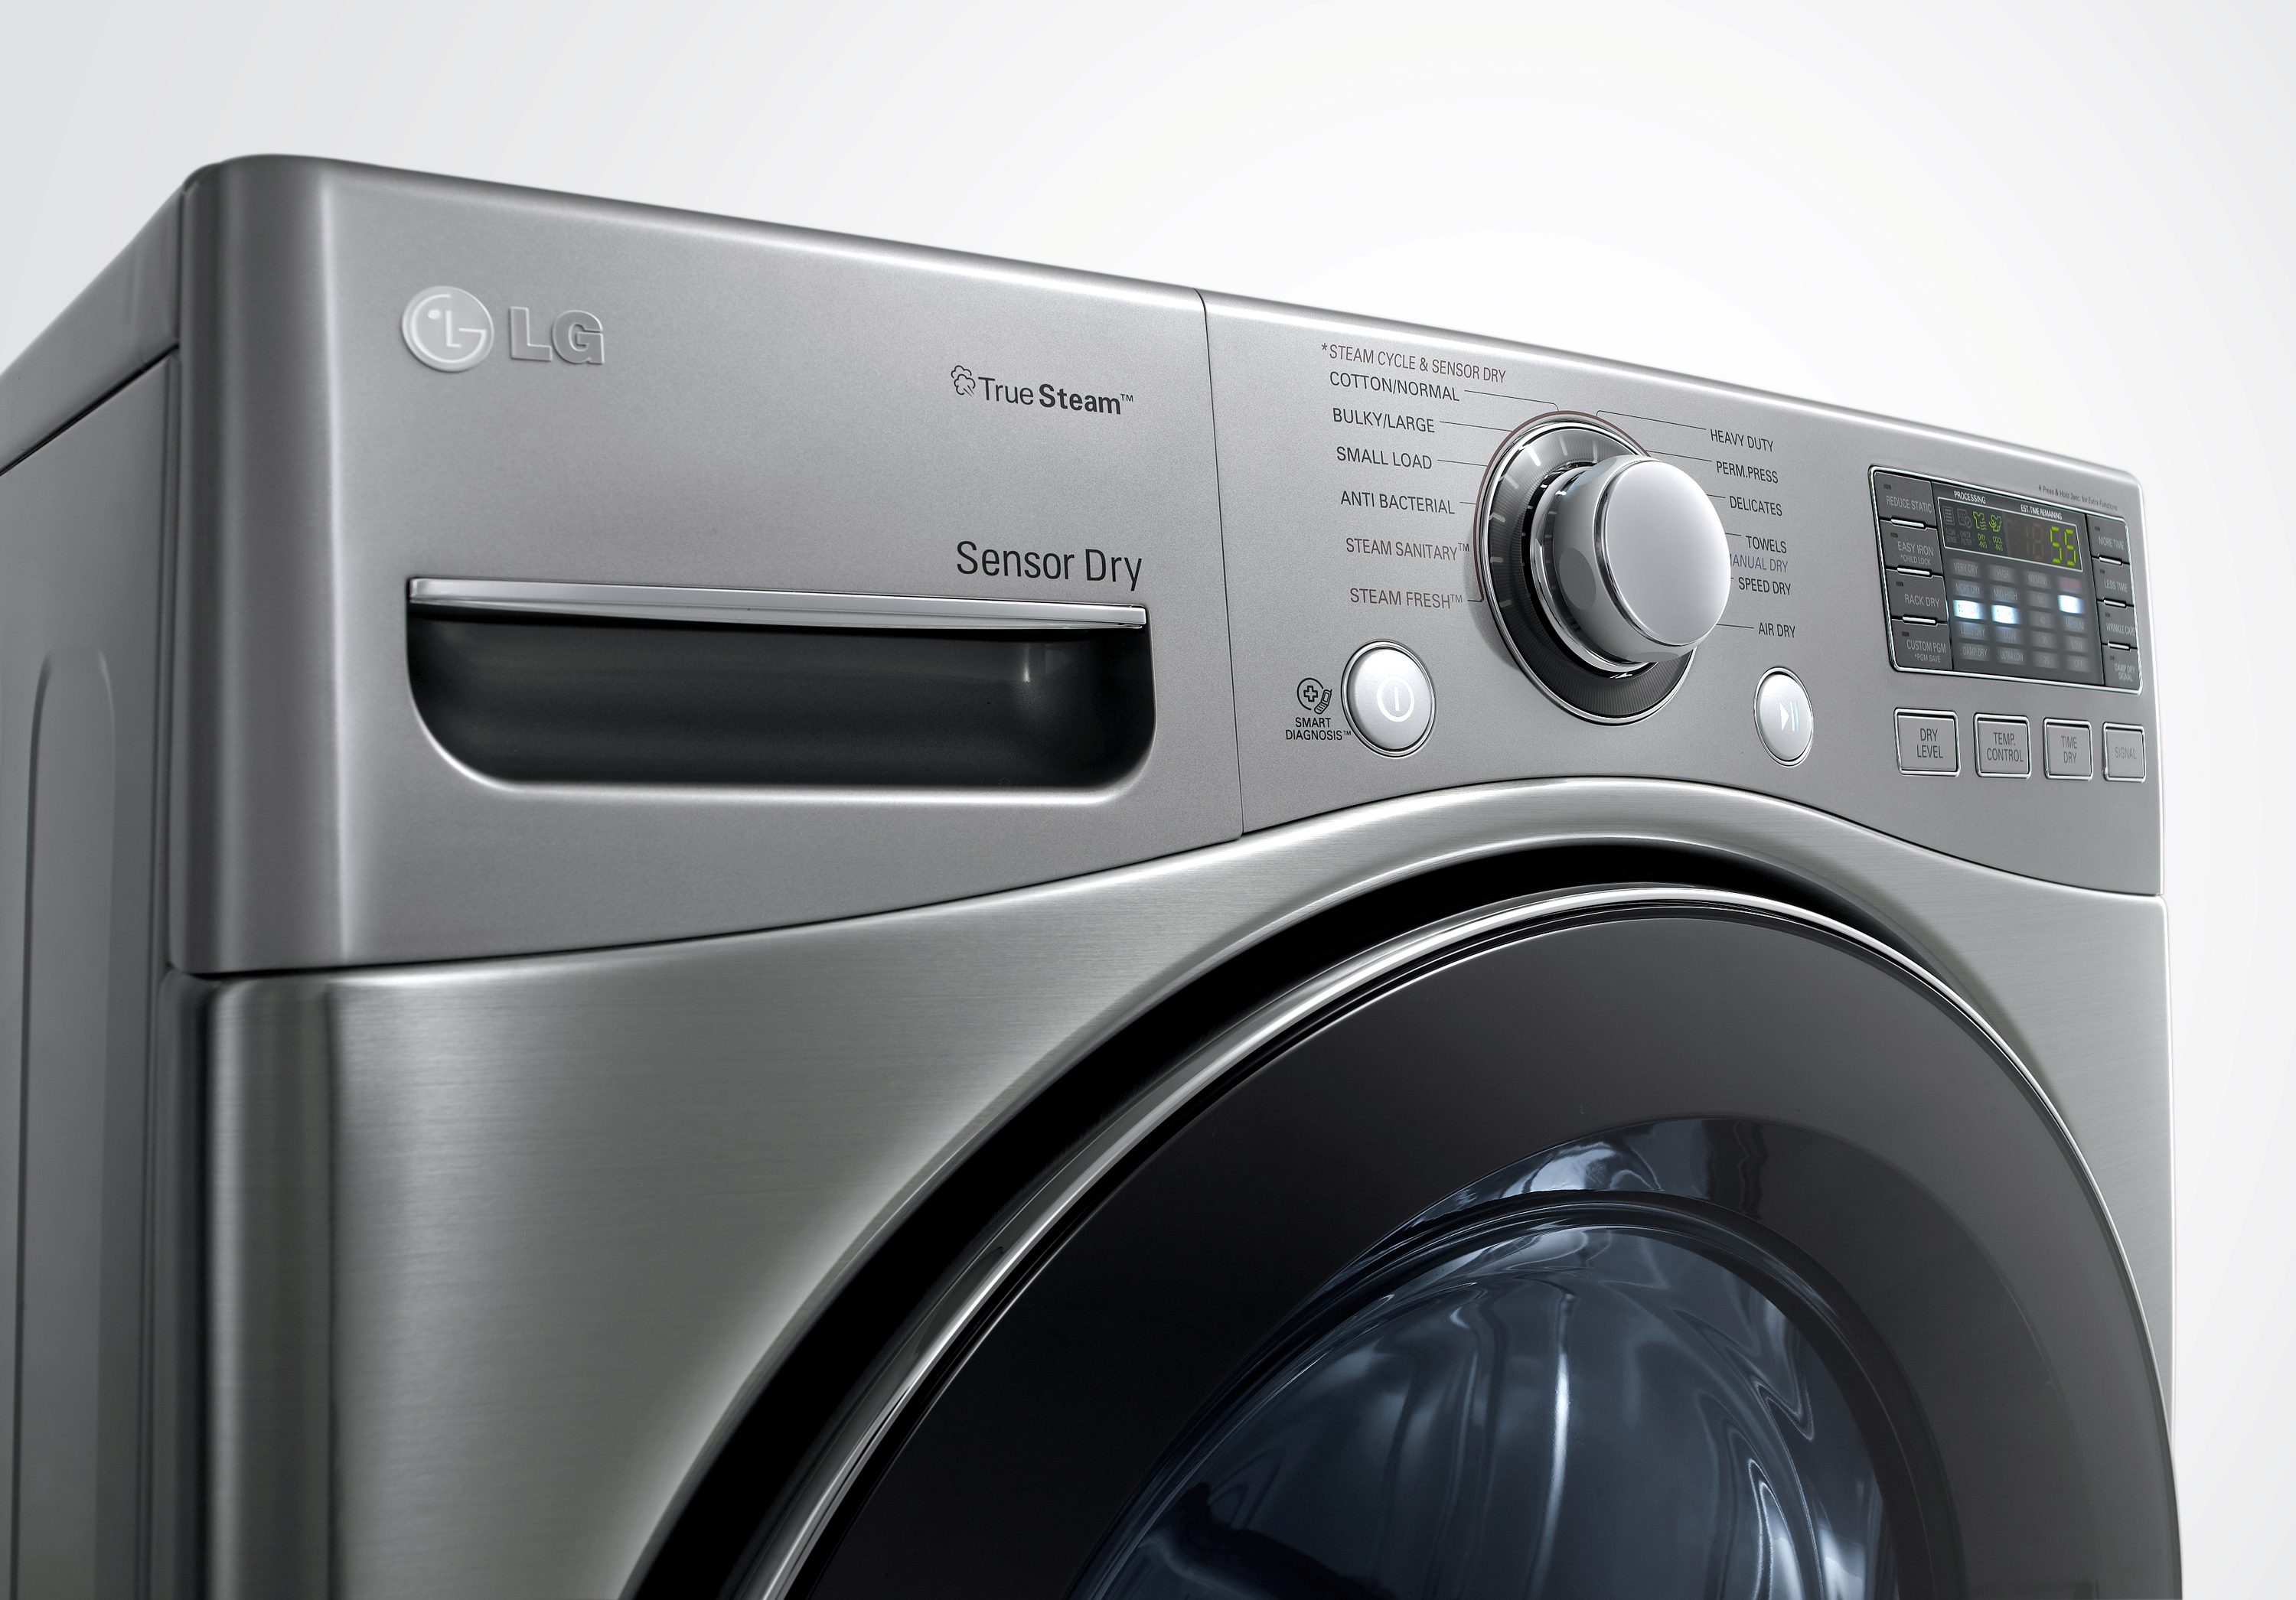 LG DLEX 3570V Dryer review: This dryer finishes cycles in a hurry